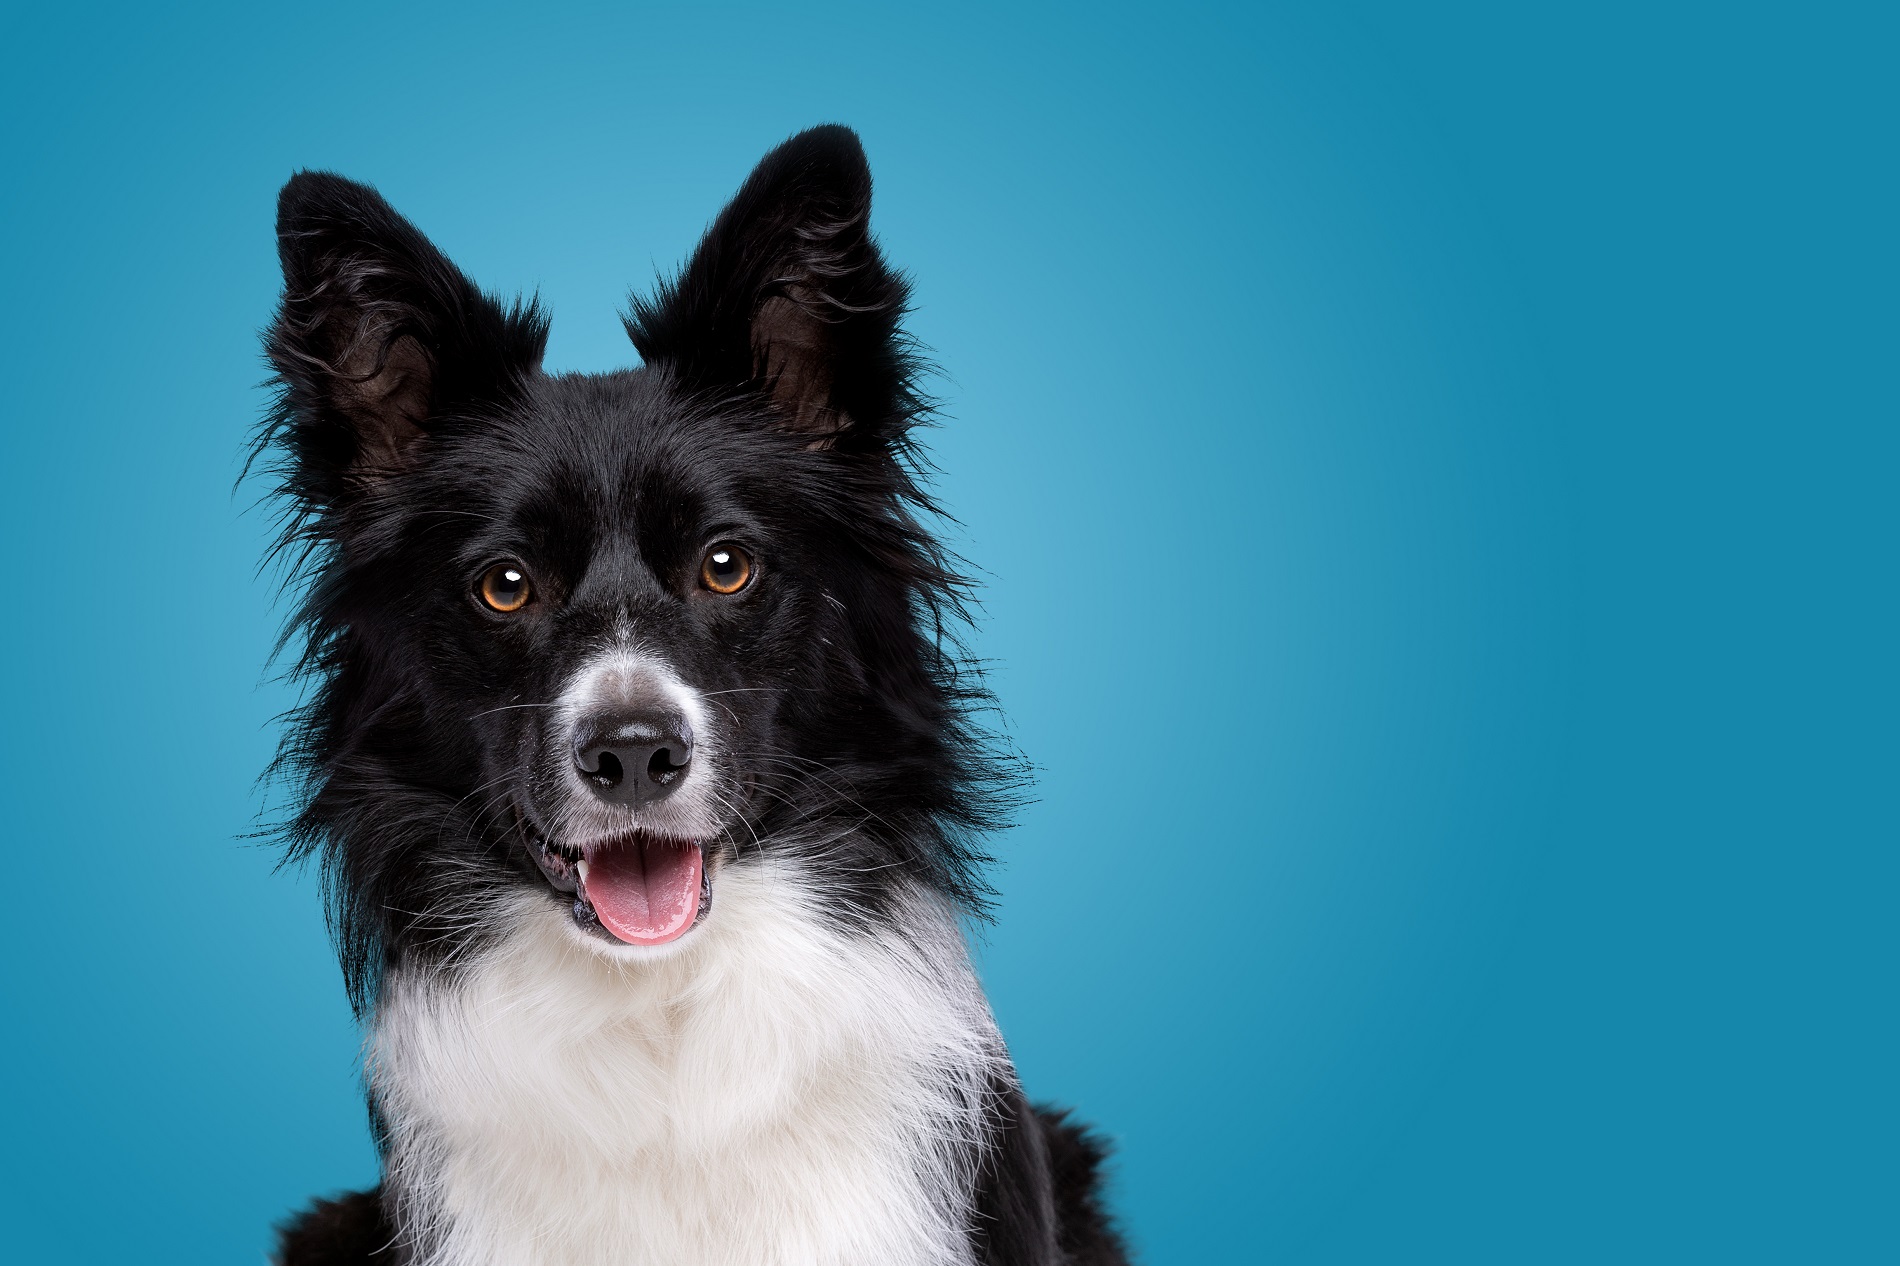 portrait of a black and white border collie dog in front of a blue background